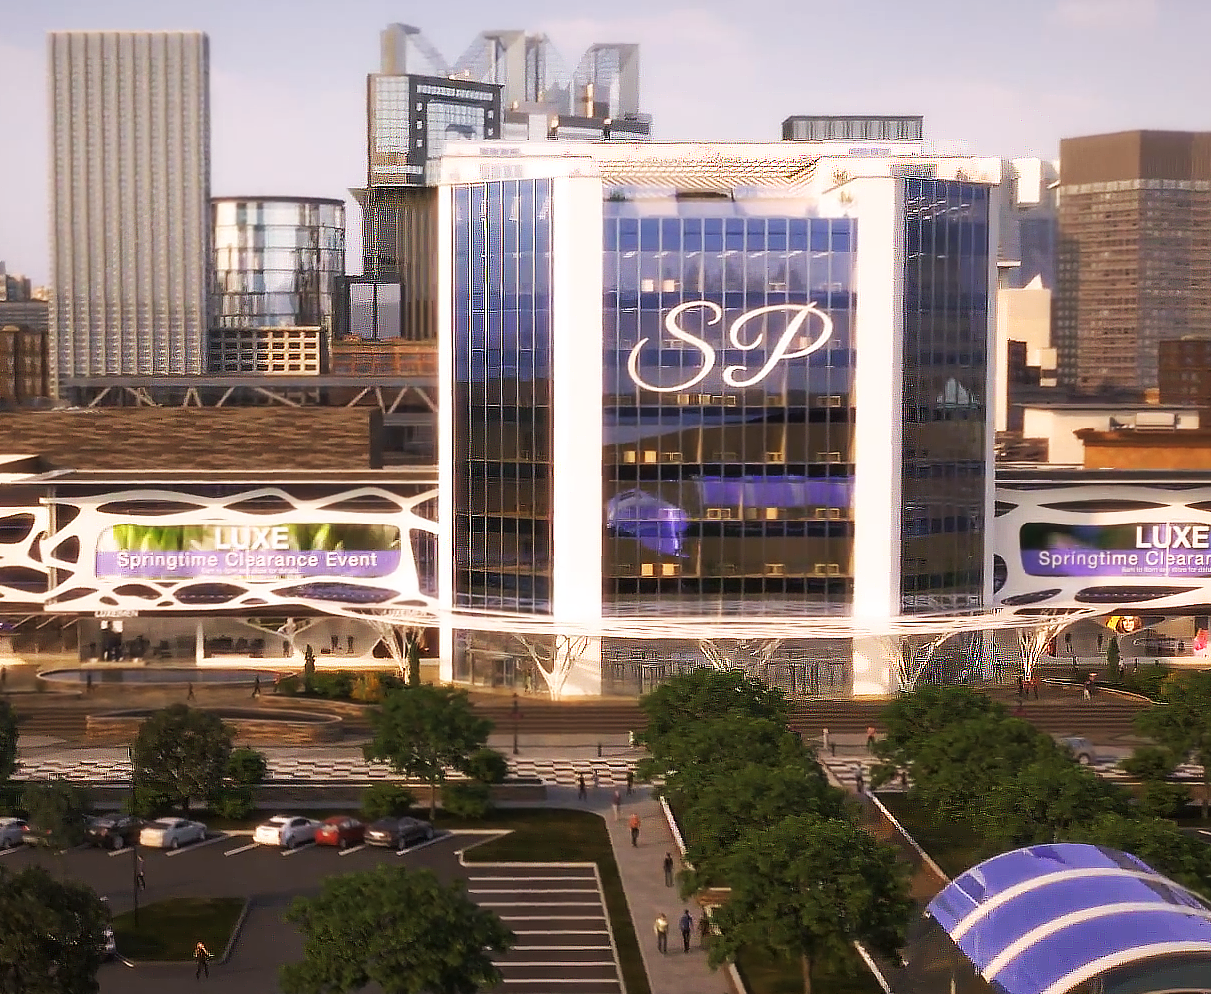 This is a 3D rendered image from Trinity's real estate renderings exhibiting the Summit Plaza Mall. This still image is from the opening scene as the camera sweeps around an overlook of the mall, featuring the city scape behind it.